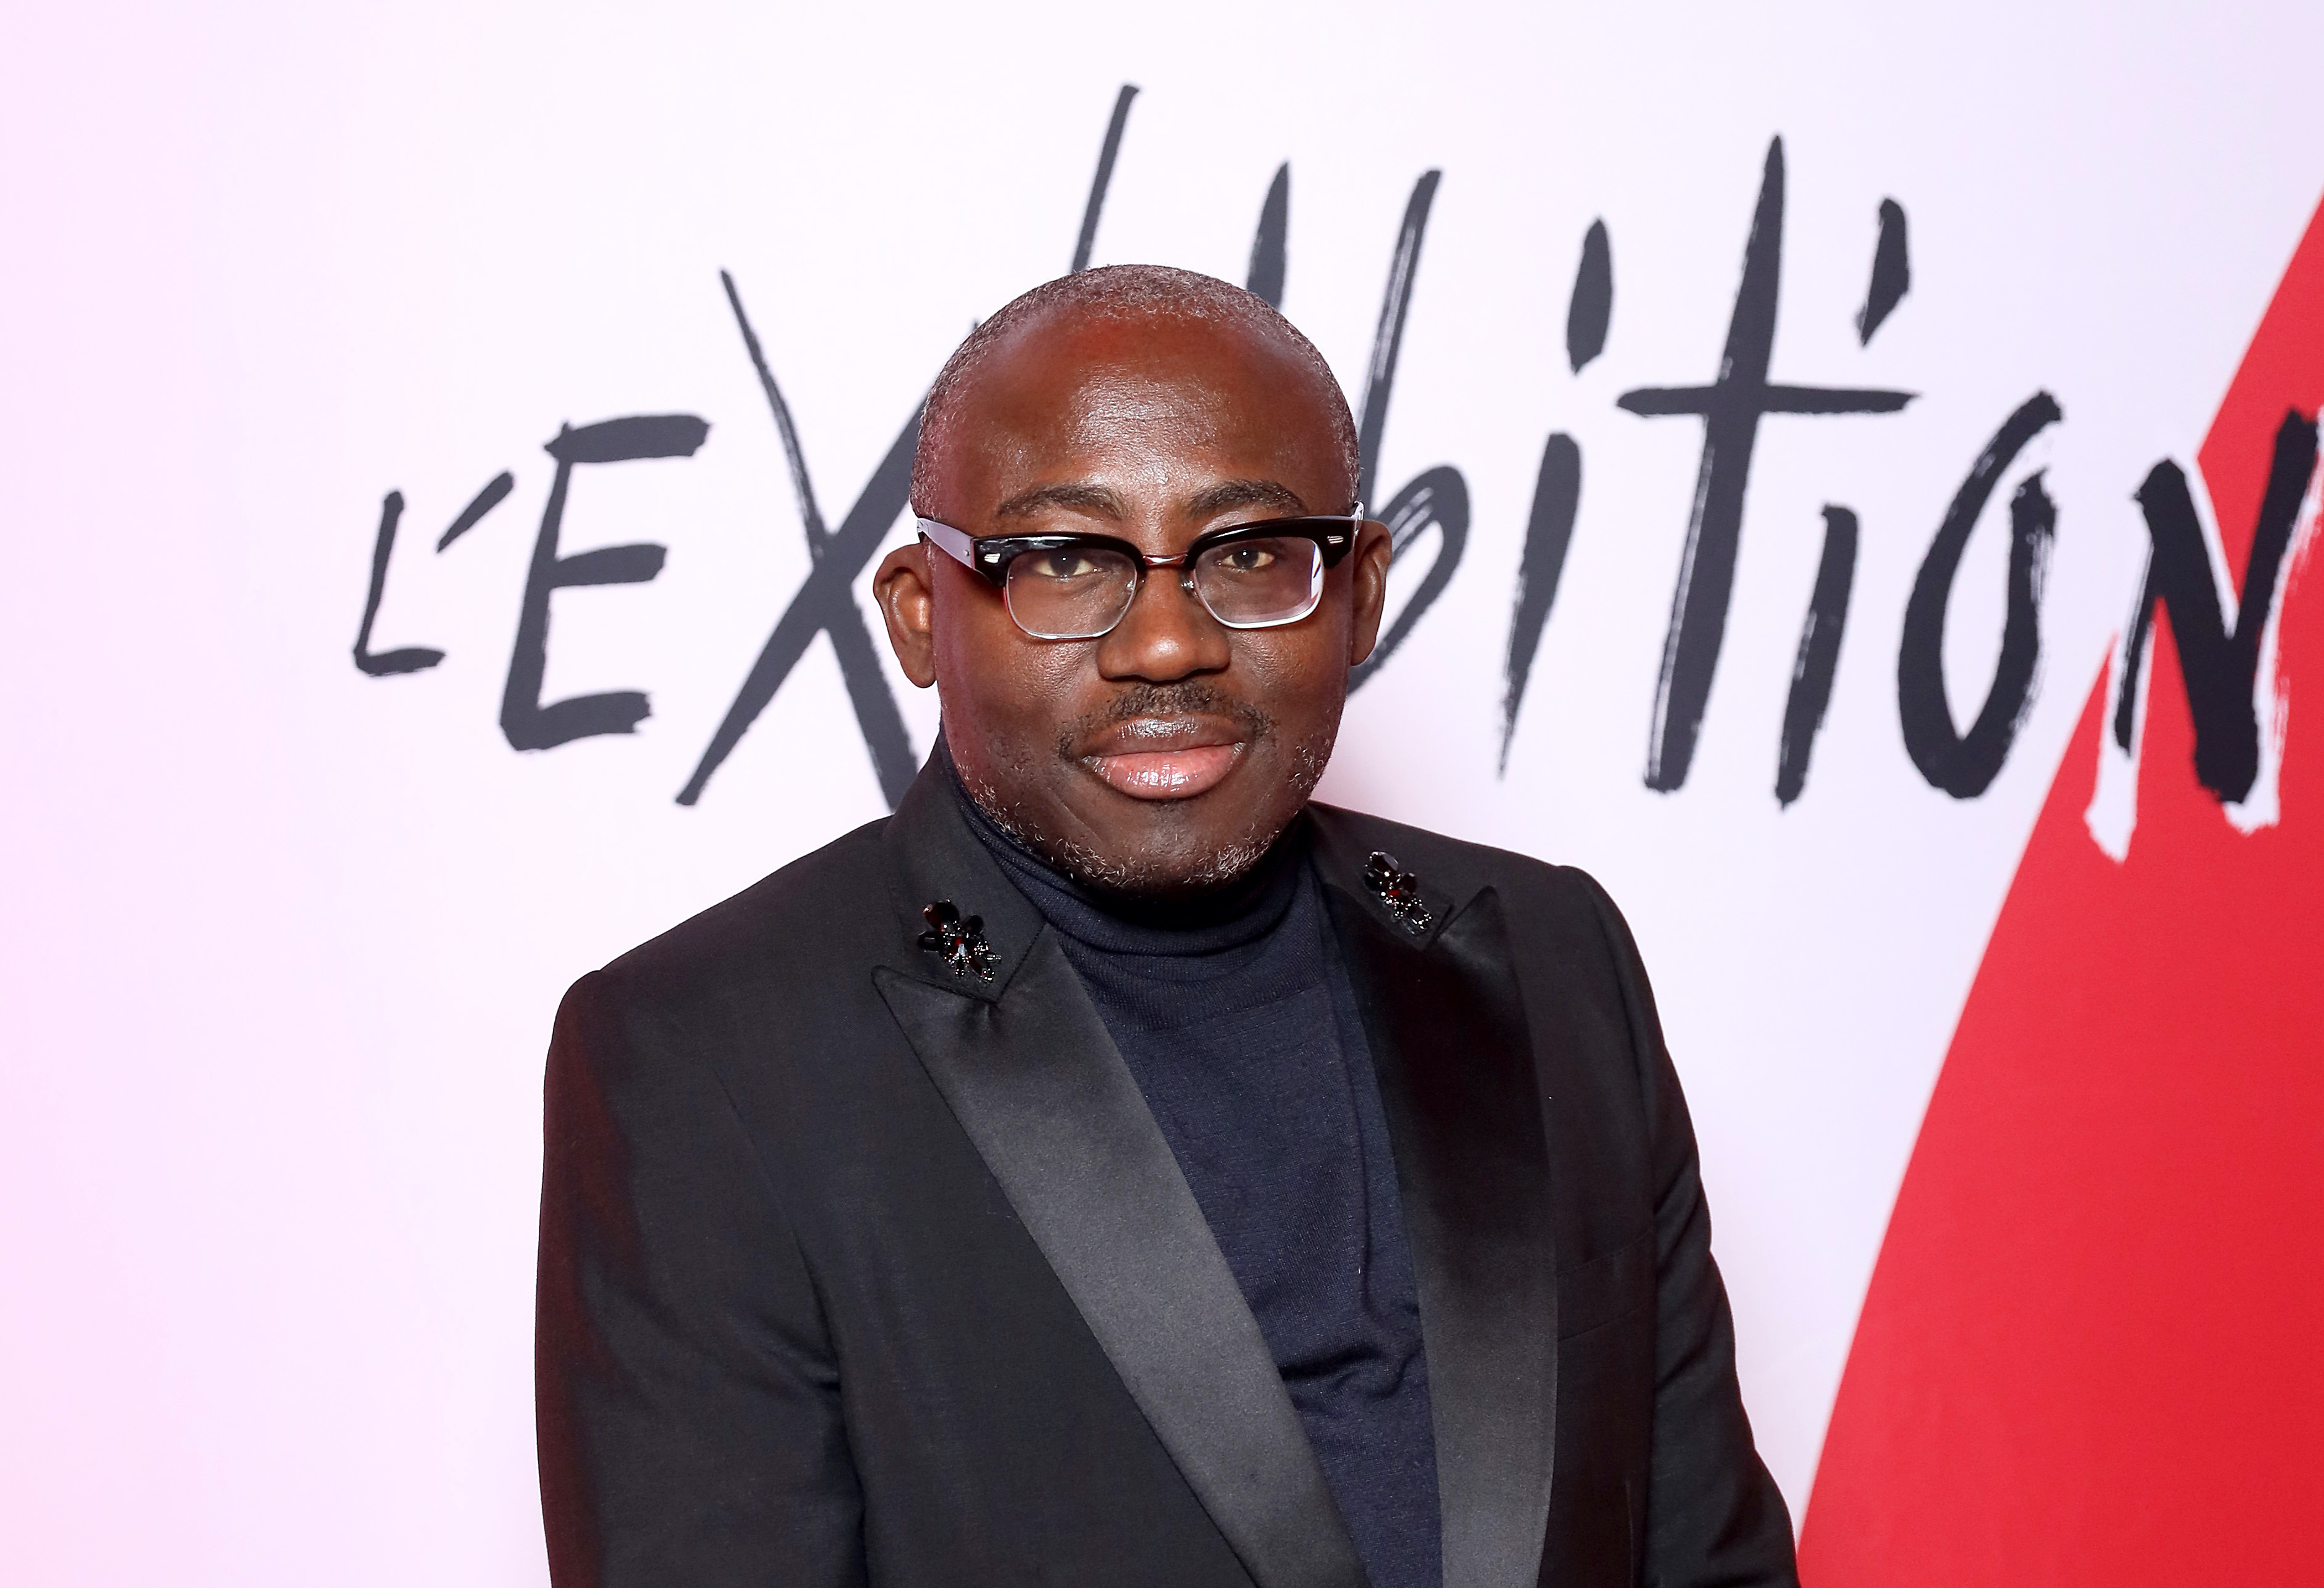 Edward Enninful attends a Paris Fashion Week event on Feb 24, 2020 in Paris, France. (Victor Boyko—Getty Images)